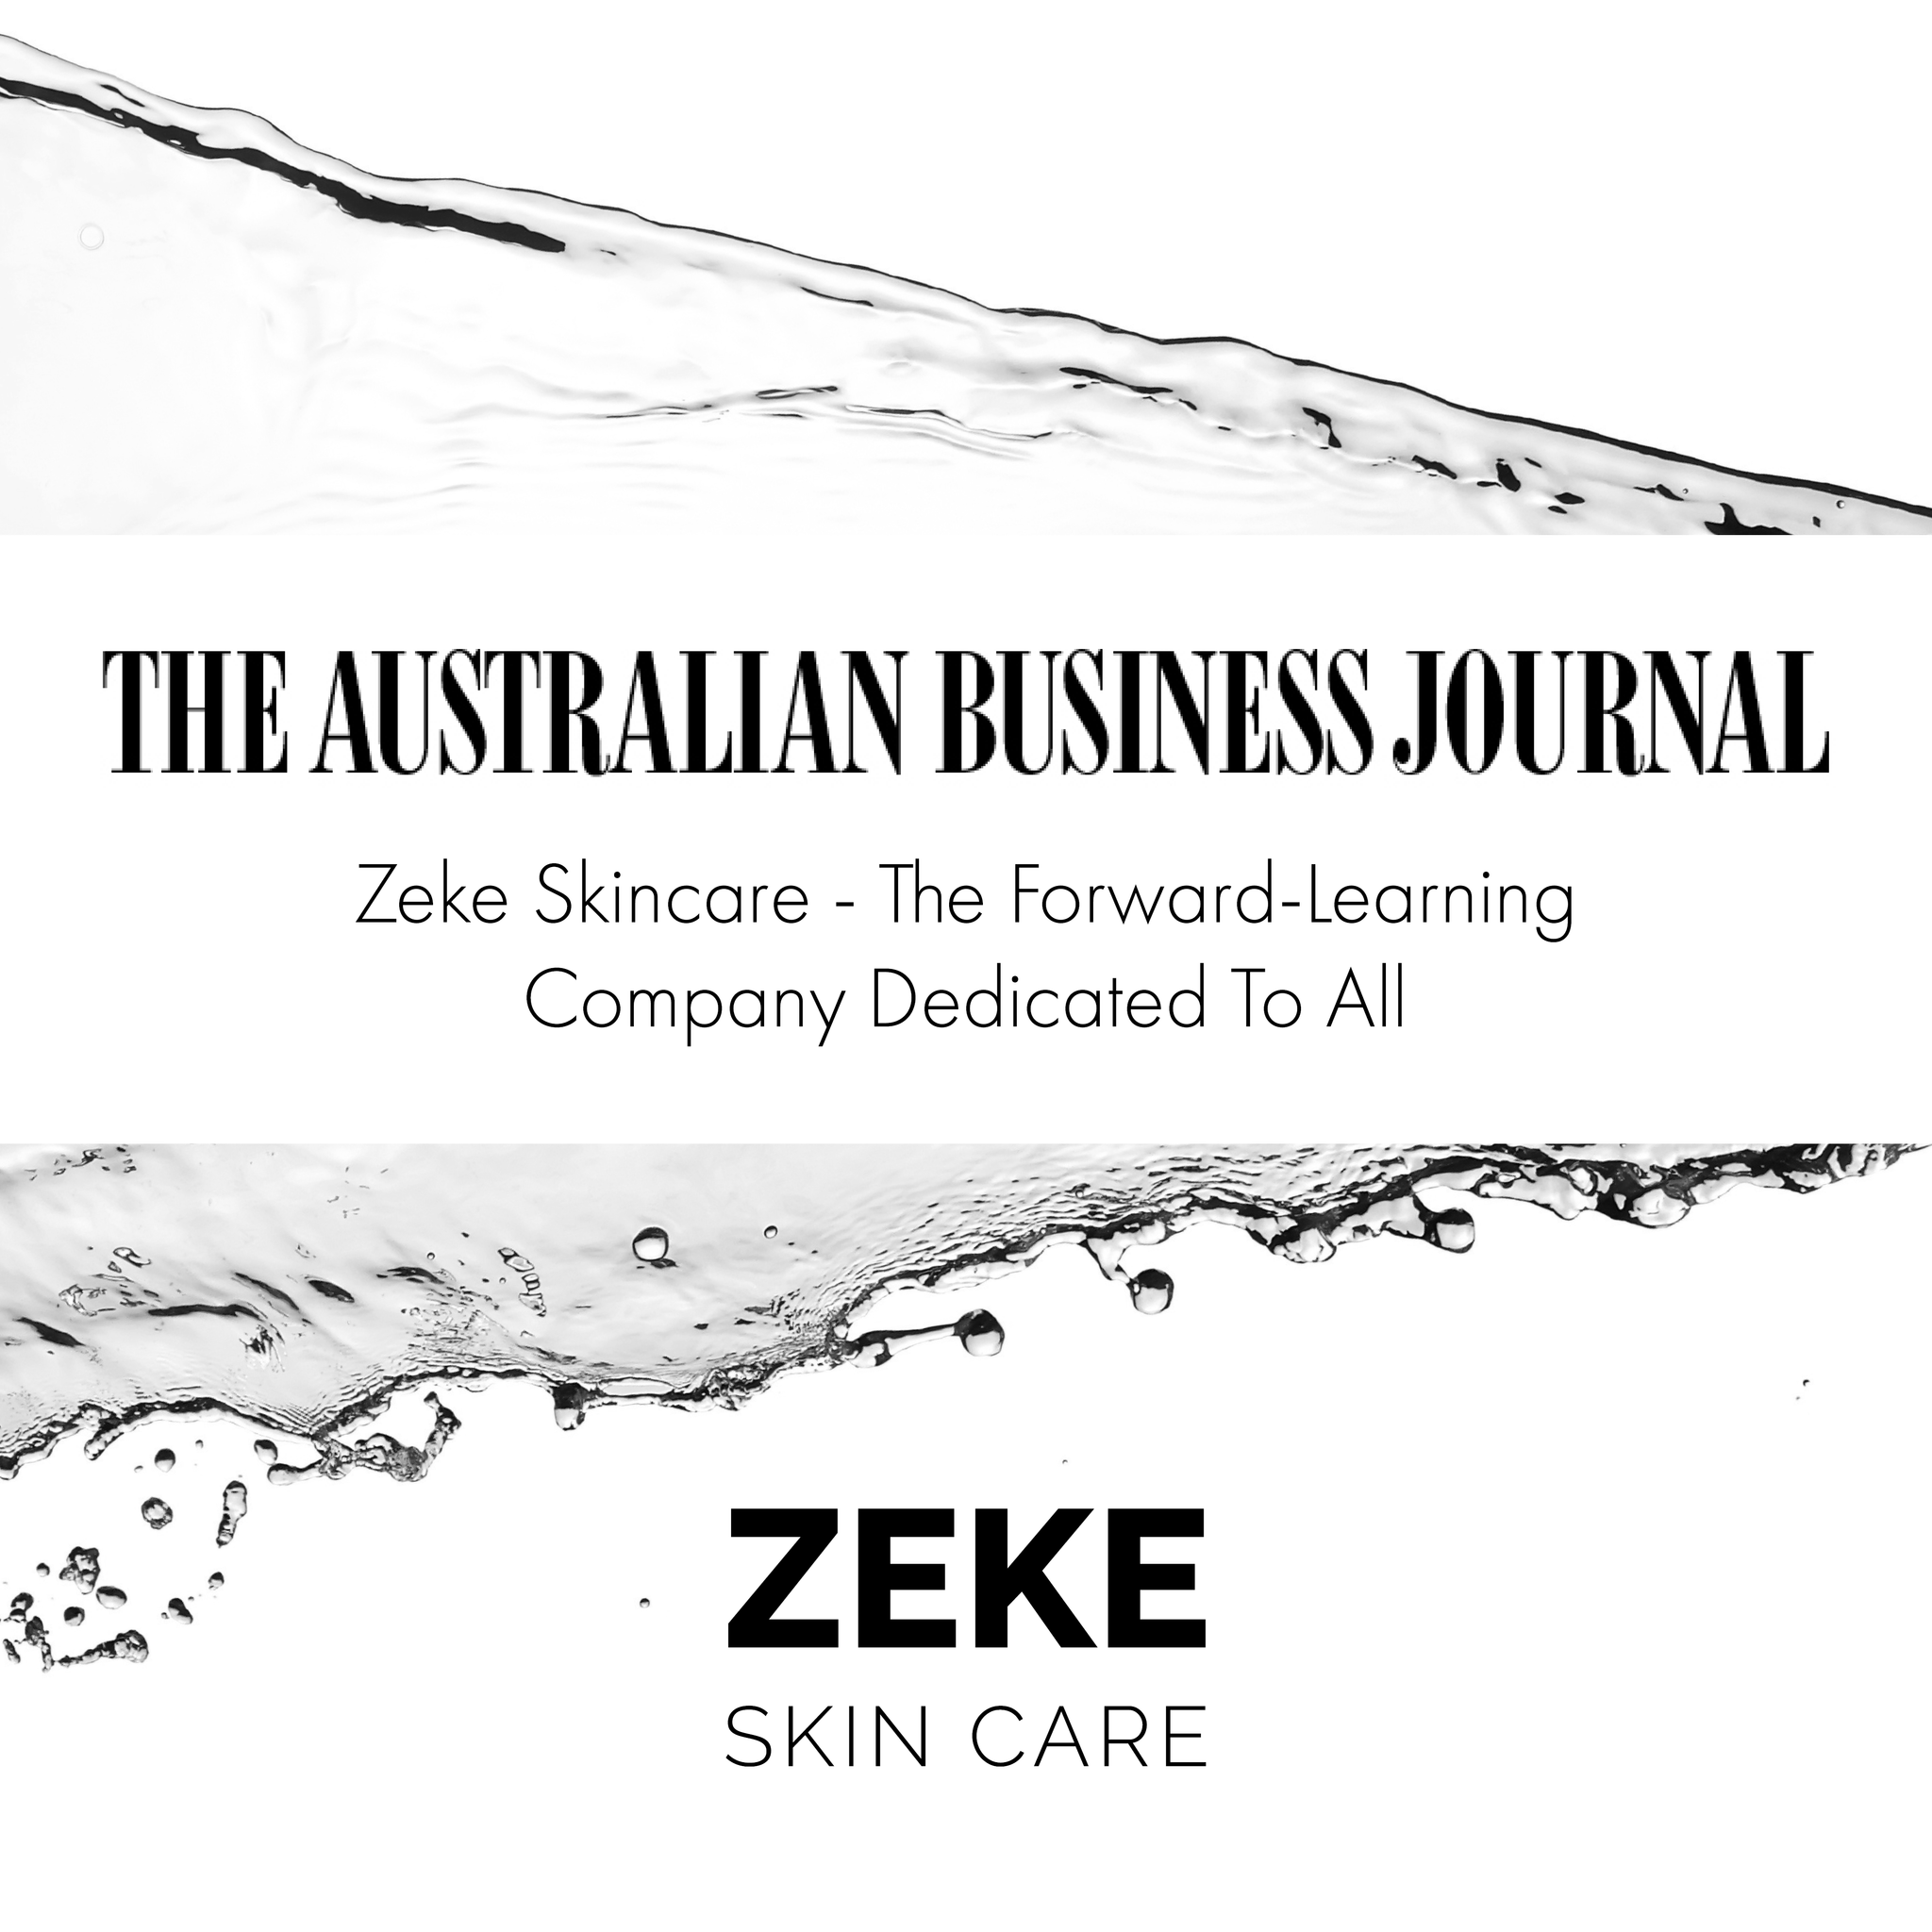 Zeke Skincare – The Forward-Learning Company Dedicated To All